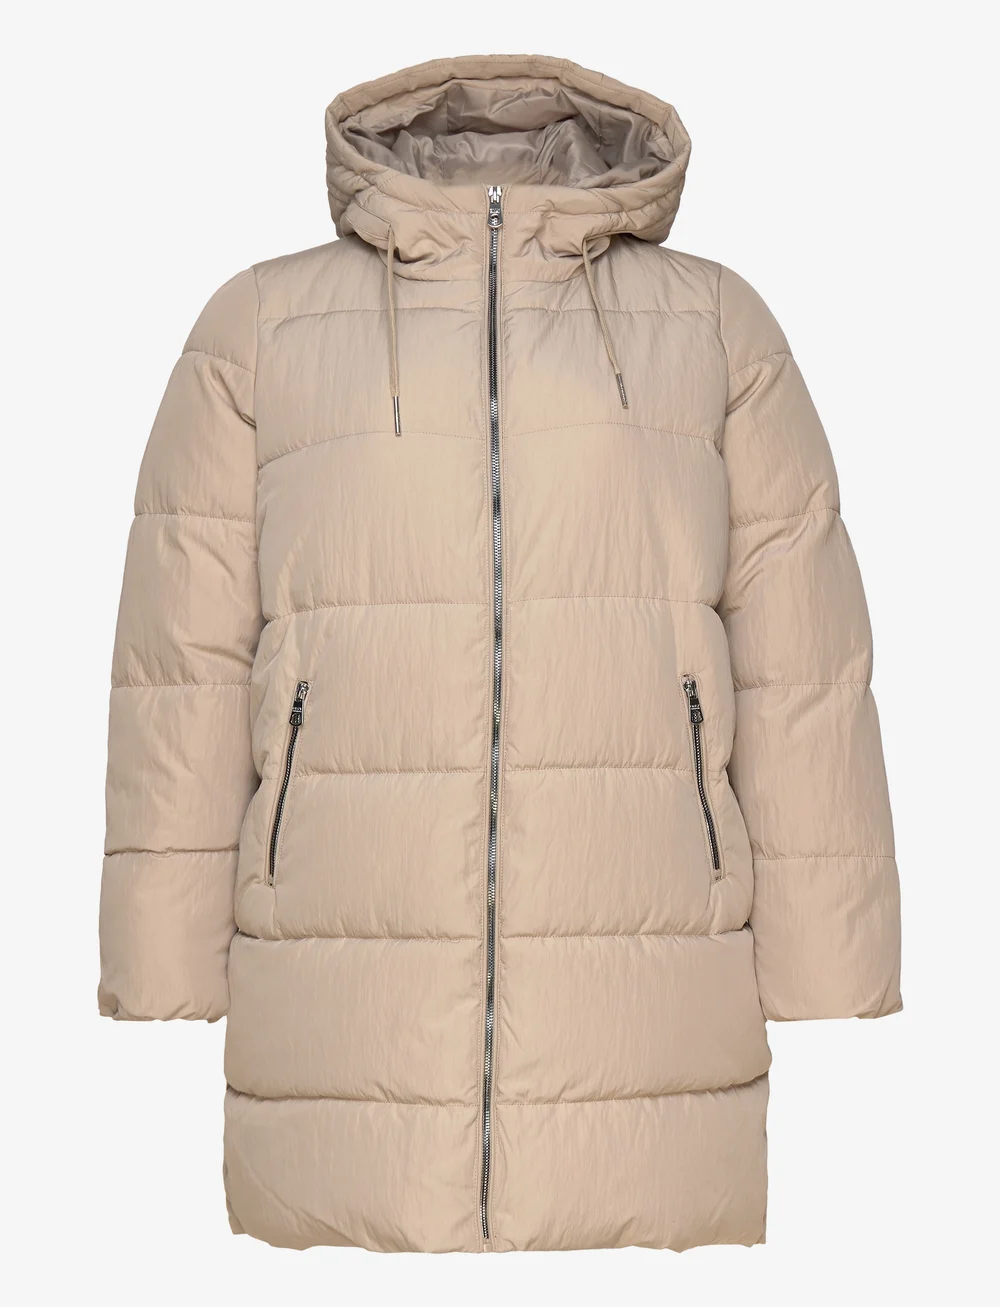 ONLY Carmakoma Carnewdolly Long Puffer Coat Cc Otw - 40.00 €. Buy Padded  Coats from ONLY Carmakoma online at Boozt.com. Fast delivery and easy  returns